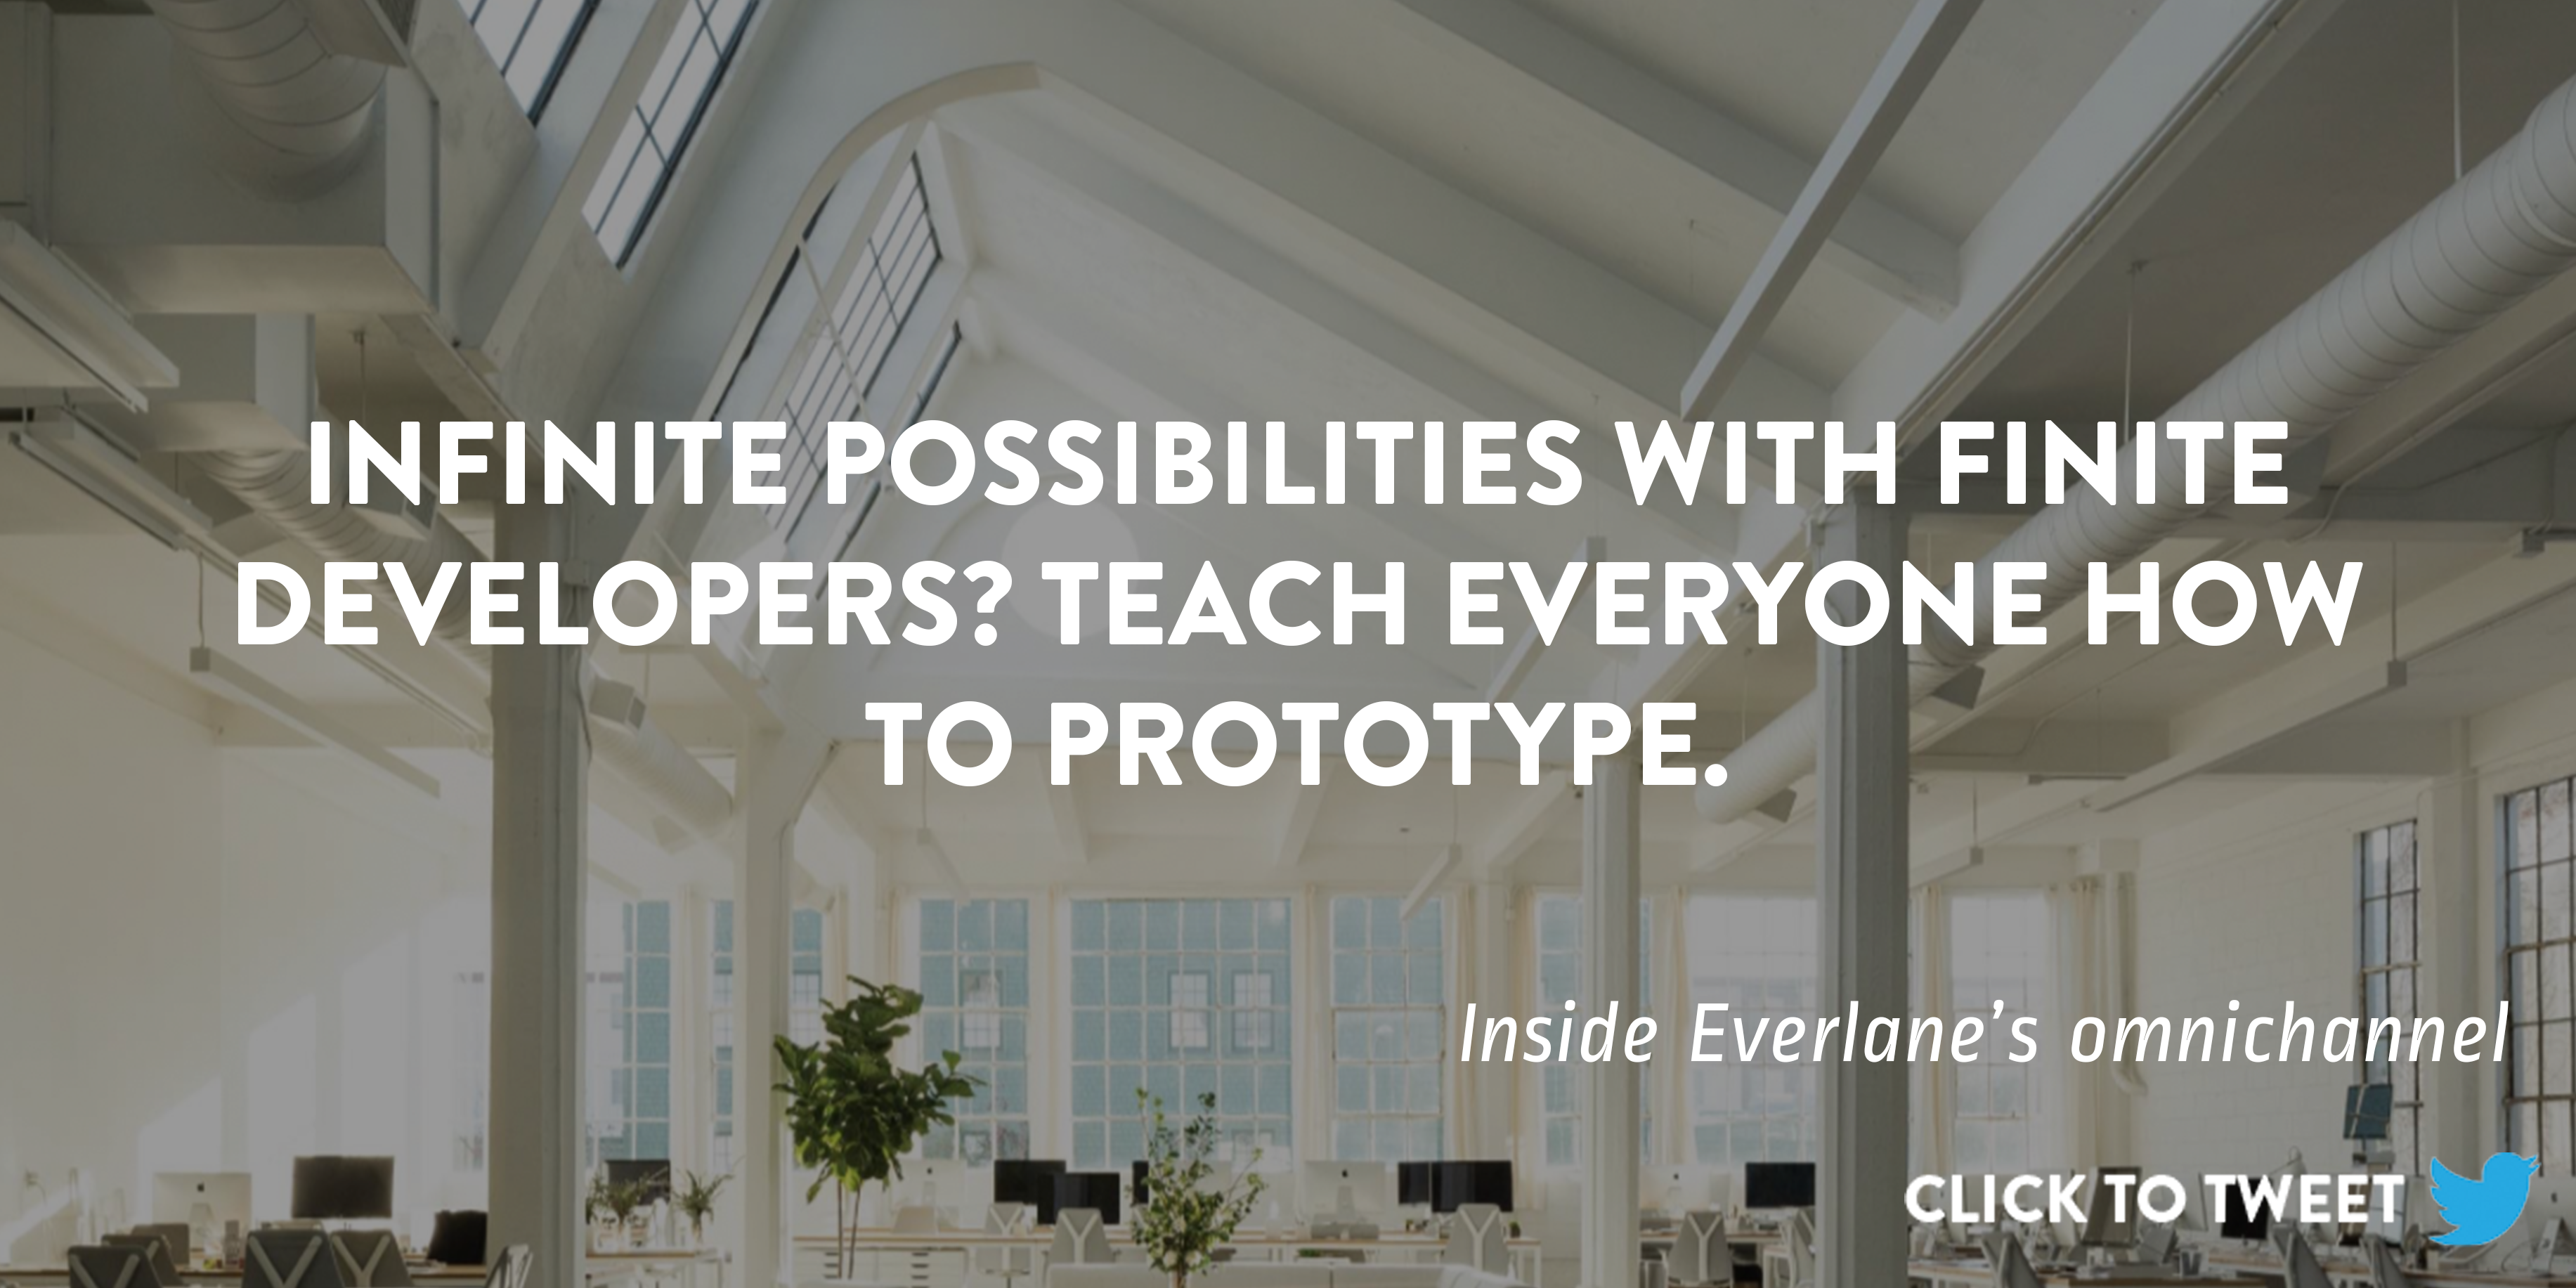 Click to tweet: "Infinite possibilities with finite developers? Teach everyone how to prototype. Inside Everlane's omnichannel strategy." 